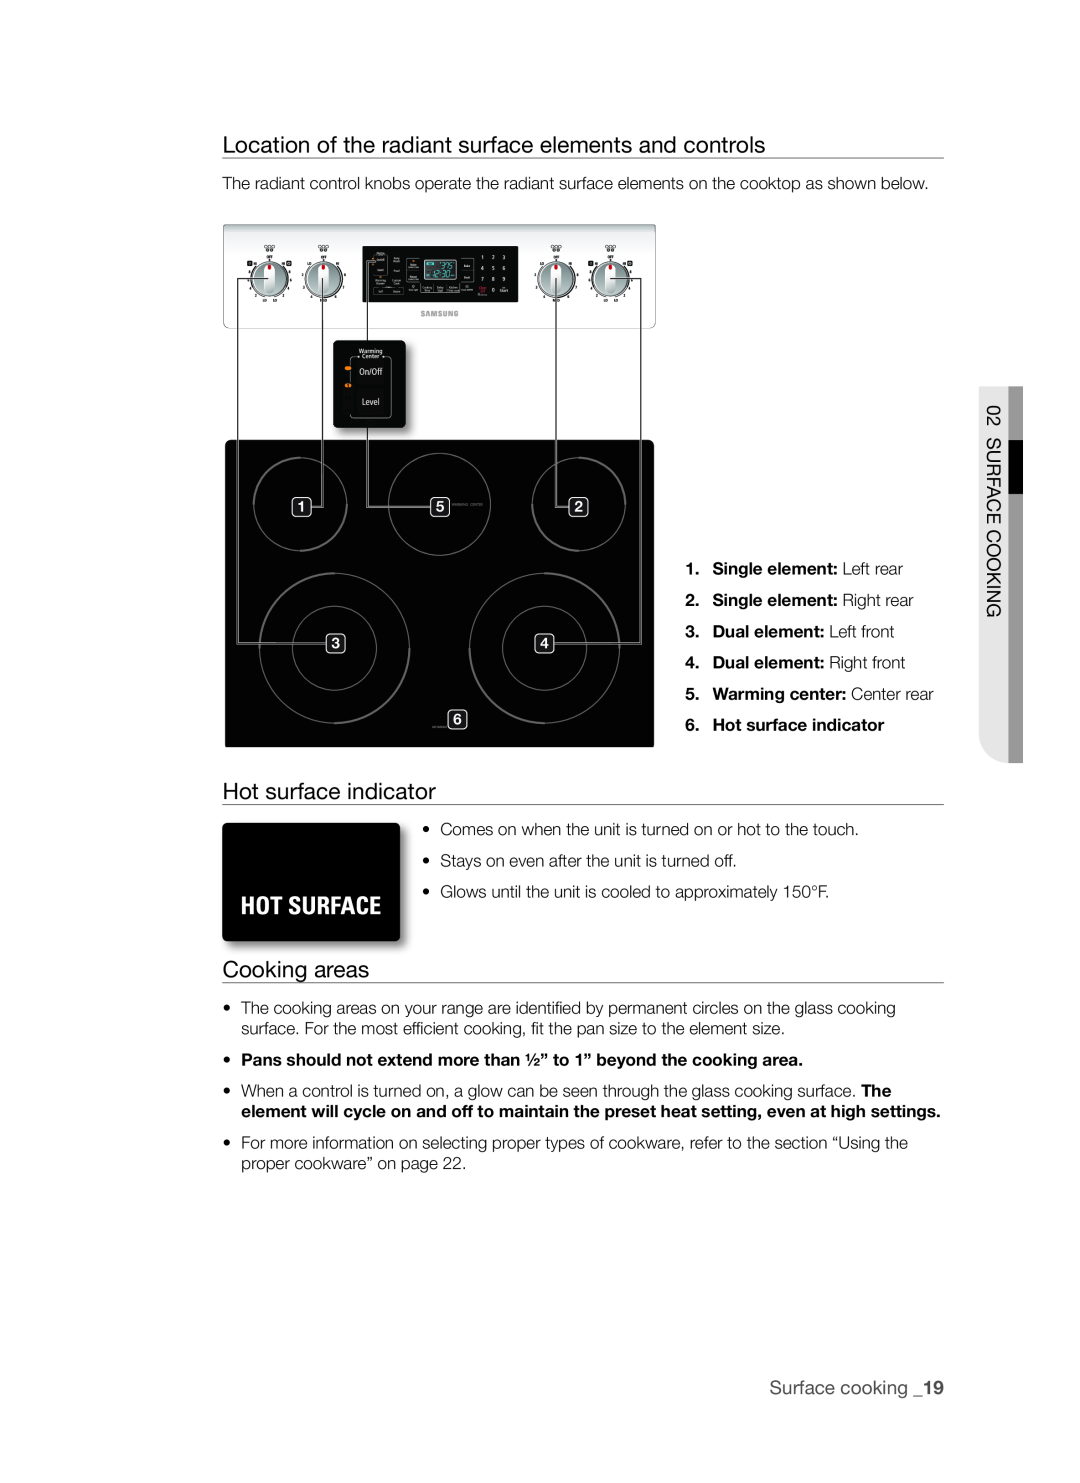 Samsung FE-R500WW user manual Location of the radiant surface elements and controls, Hot surface indicator, Cooking areas 